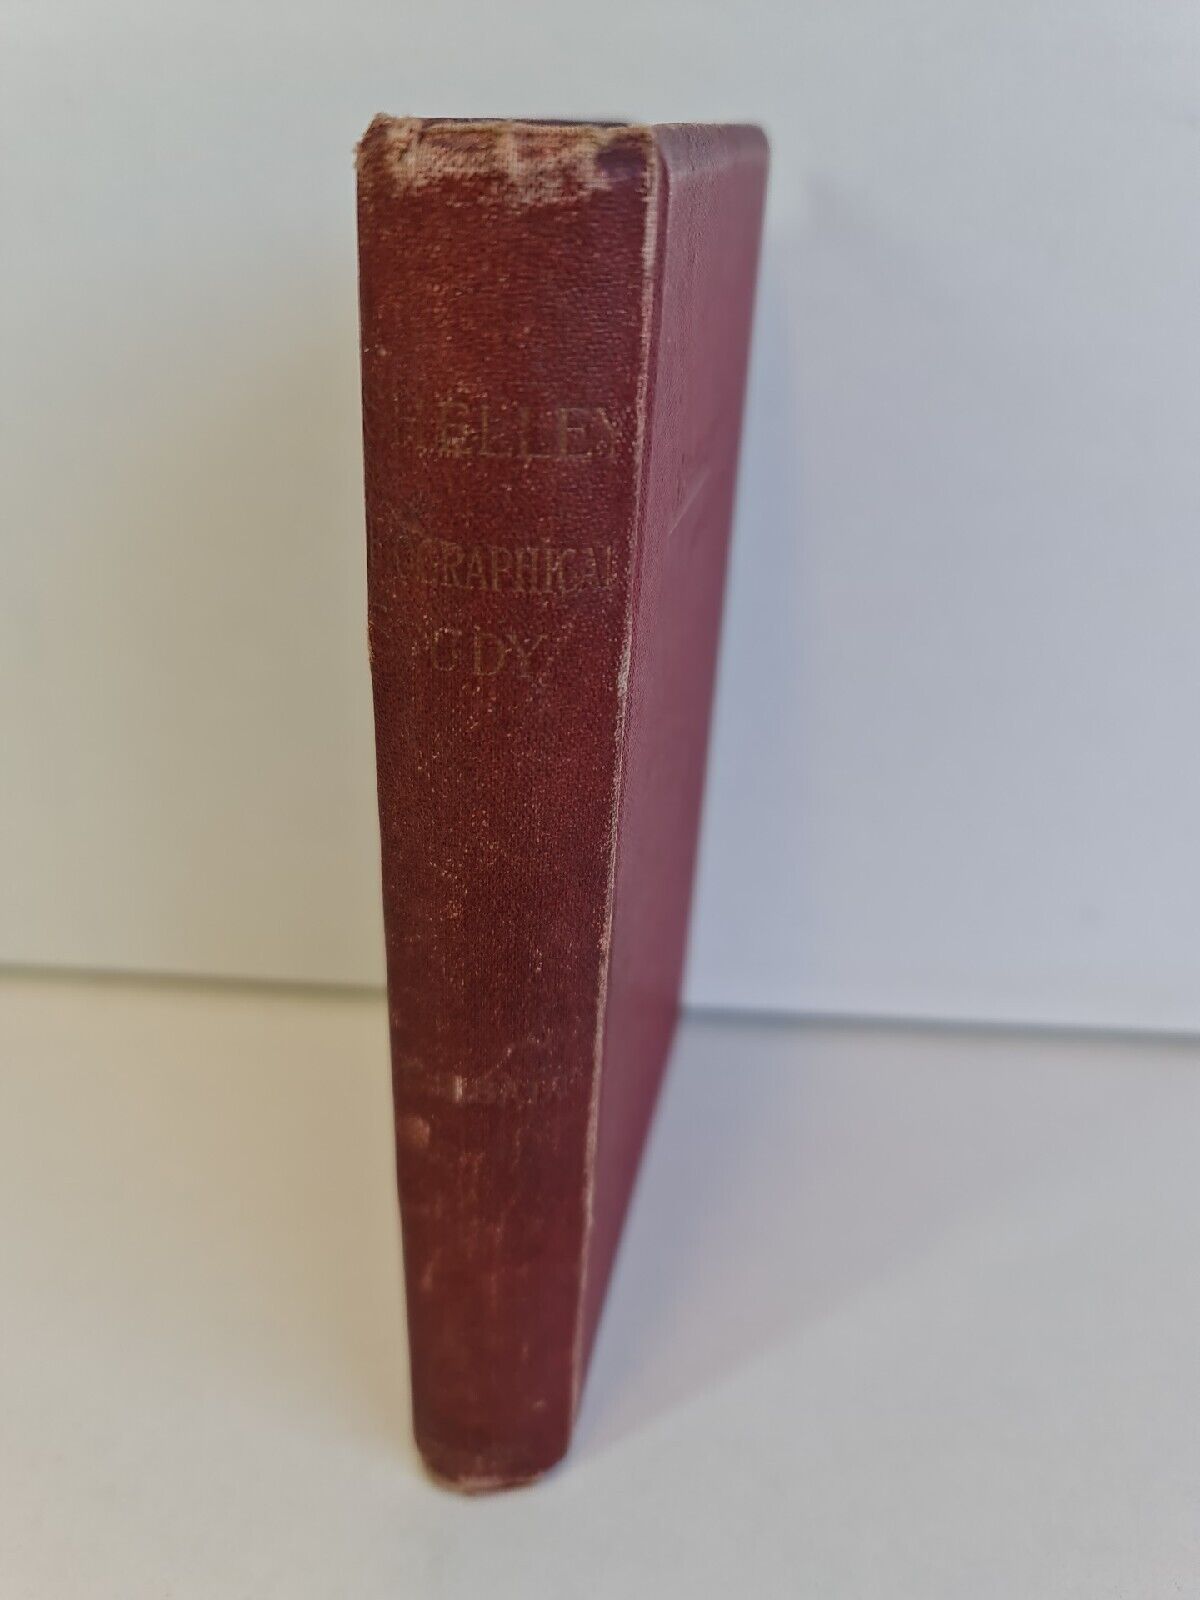 Percy Bysshe Shelley: Poet & Pioneer; Biographical Study by Henry Salt (1896)